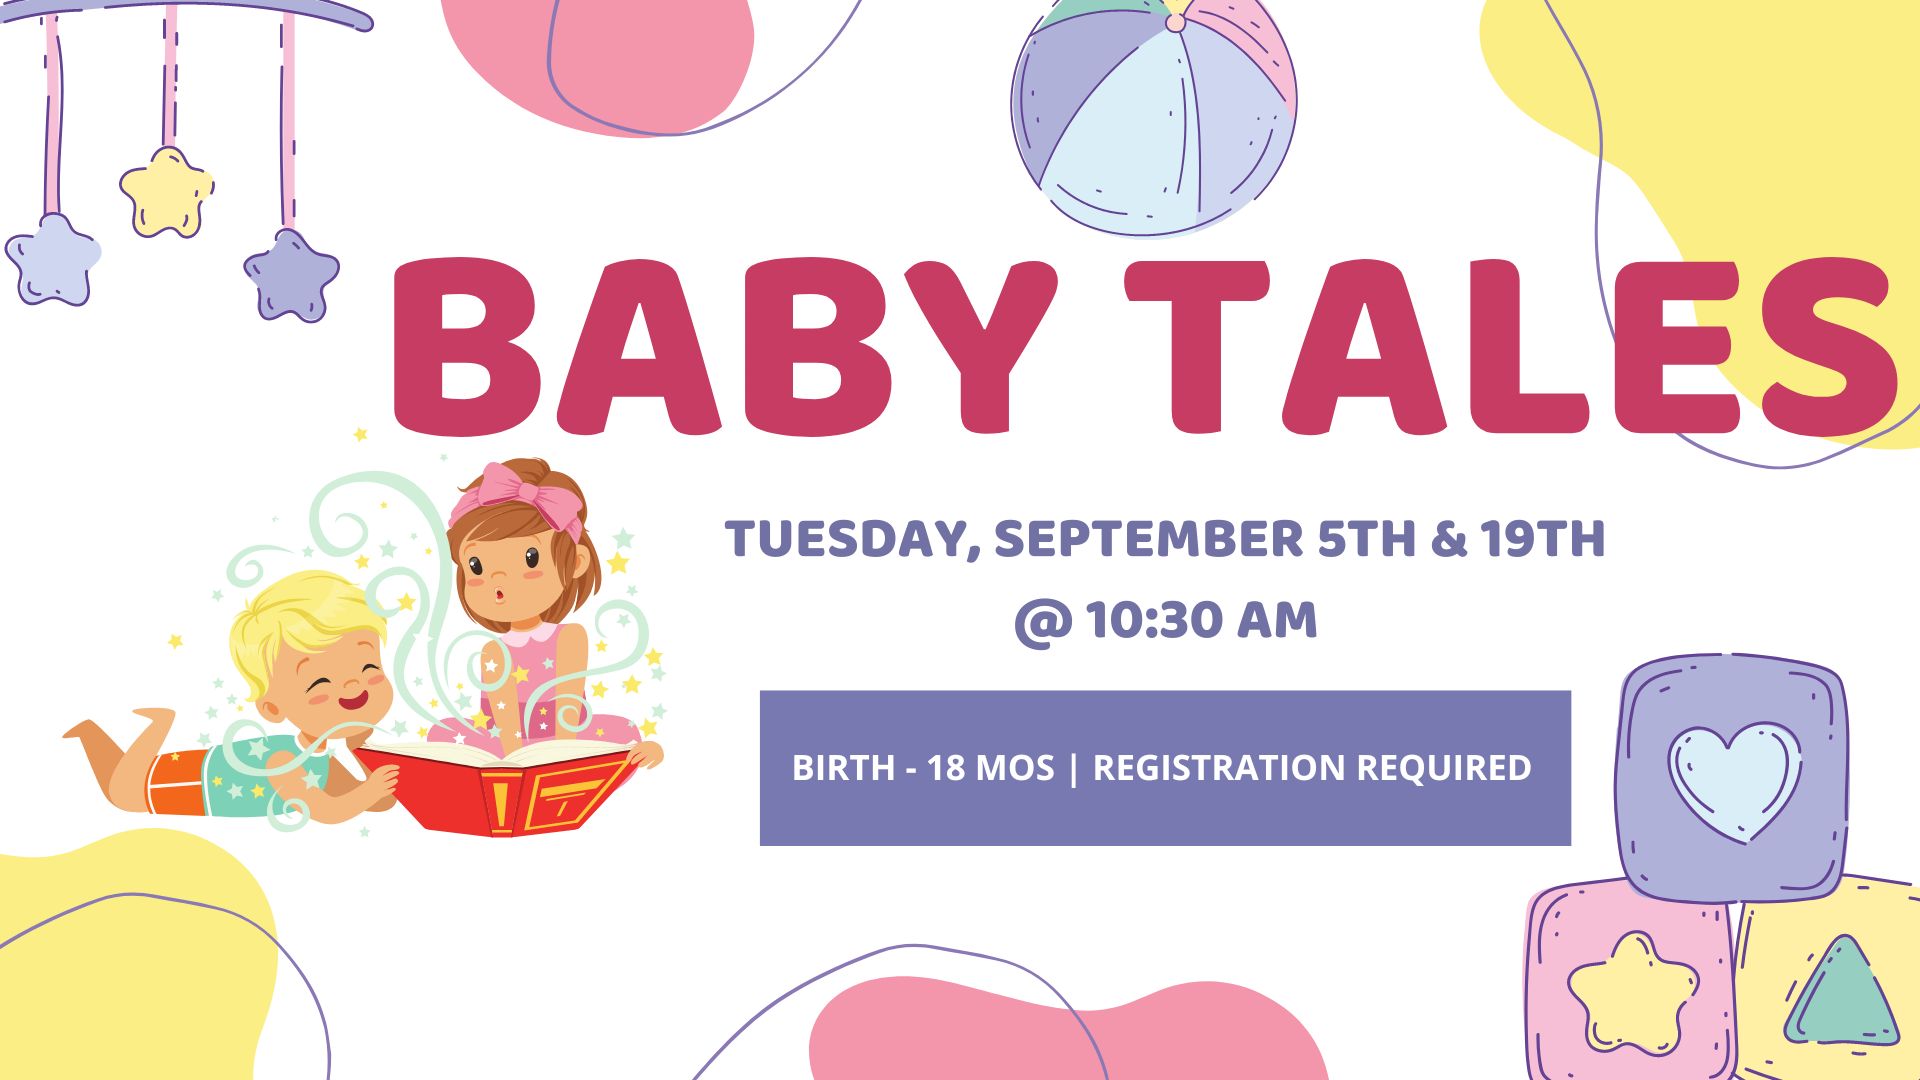 Baby Tales.  September 5th and 19th. Ages Birth to 18 mos. Registration required.